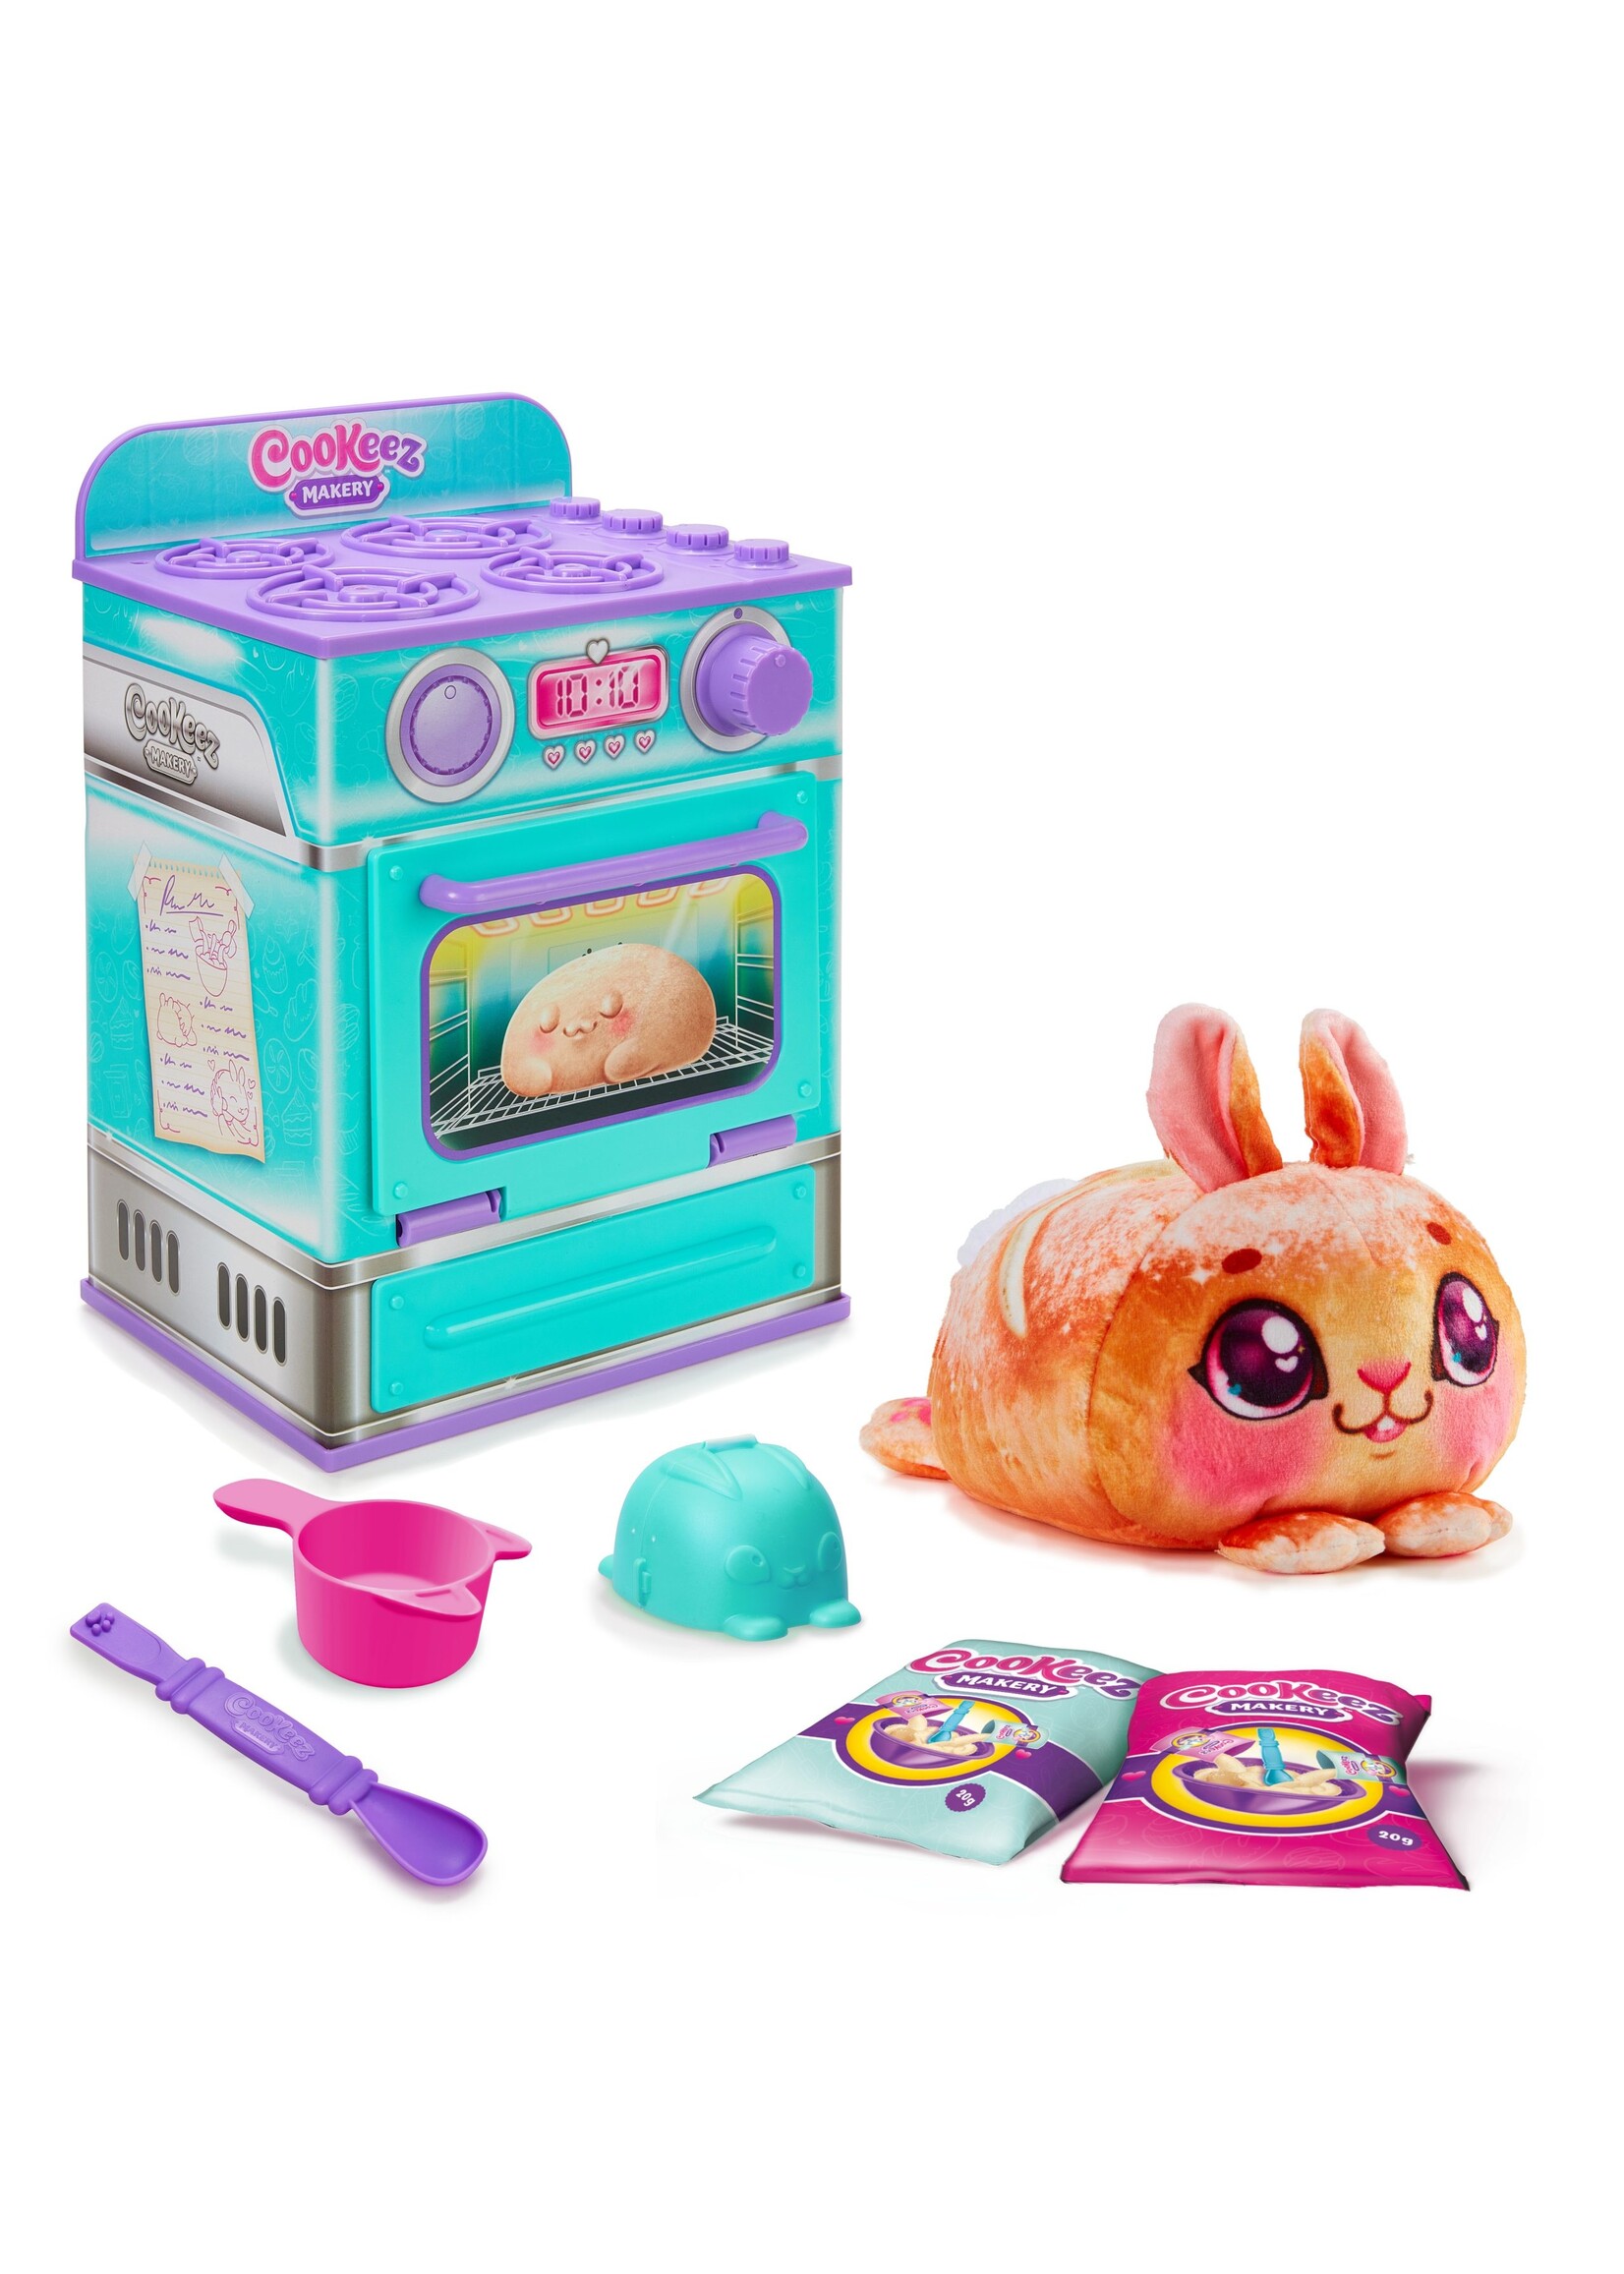 License 2 Play Cookeez Makery Oven Playset - Assorted